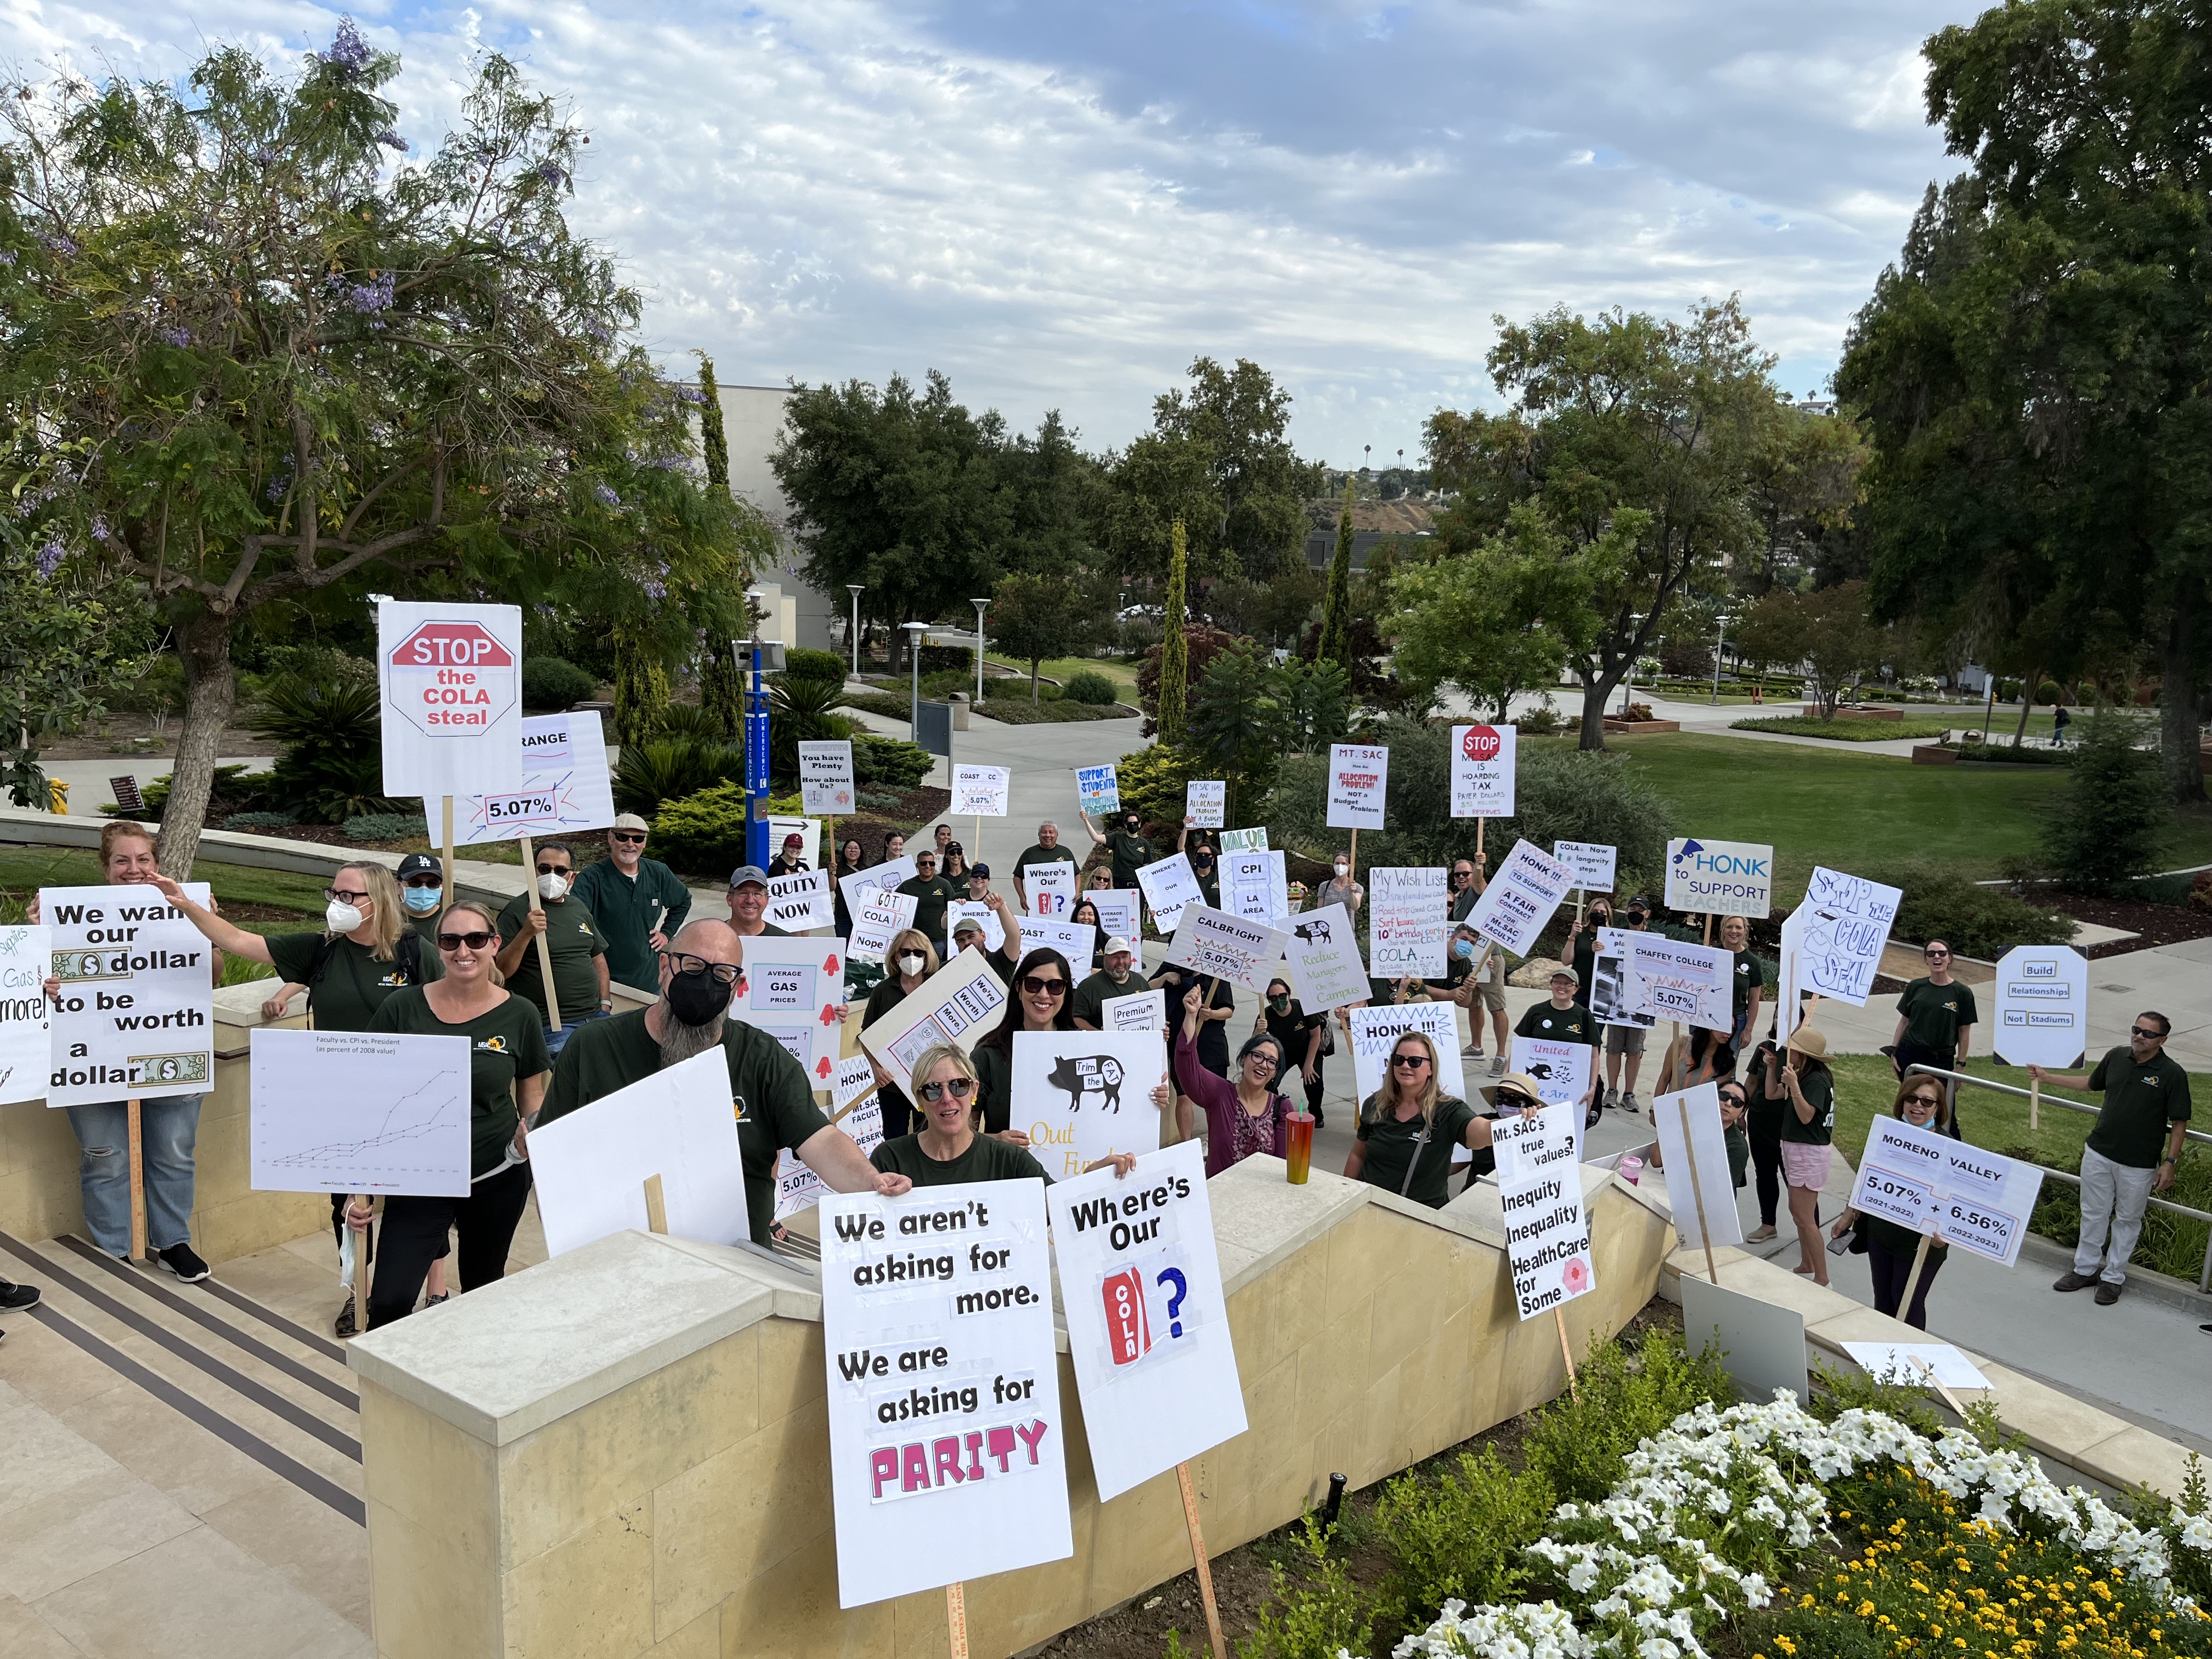 Faculty rally for fair settlement at the June 22 Board of Trustees Meeting